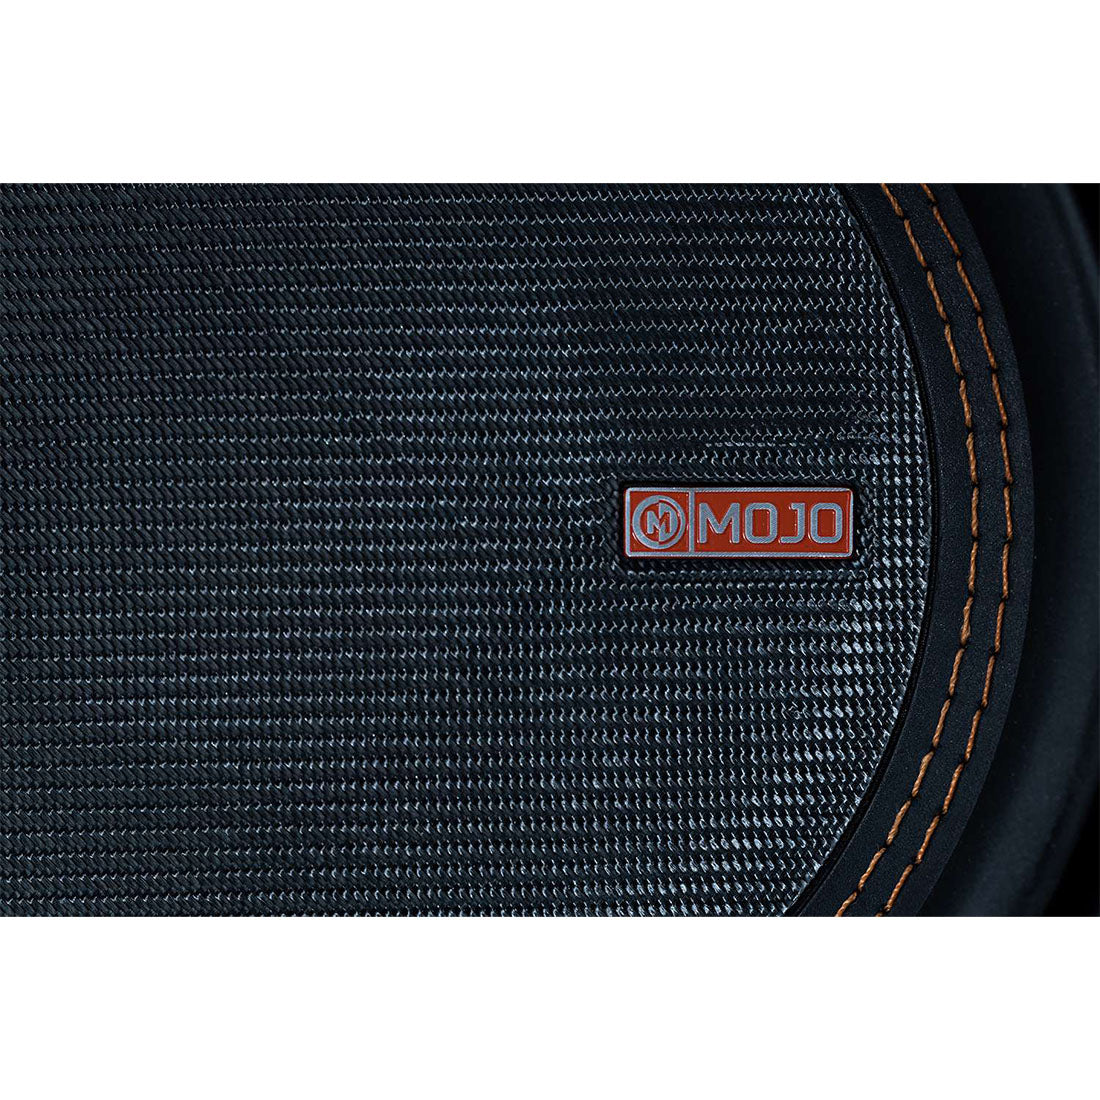 Memphis Audio MJM612 6.5" Mojo Mini Subwoofer with Selectable 1- or 2-ohm Impedance